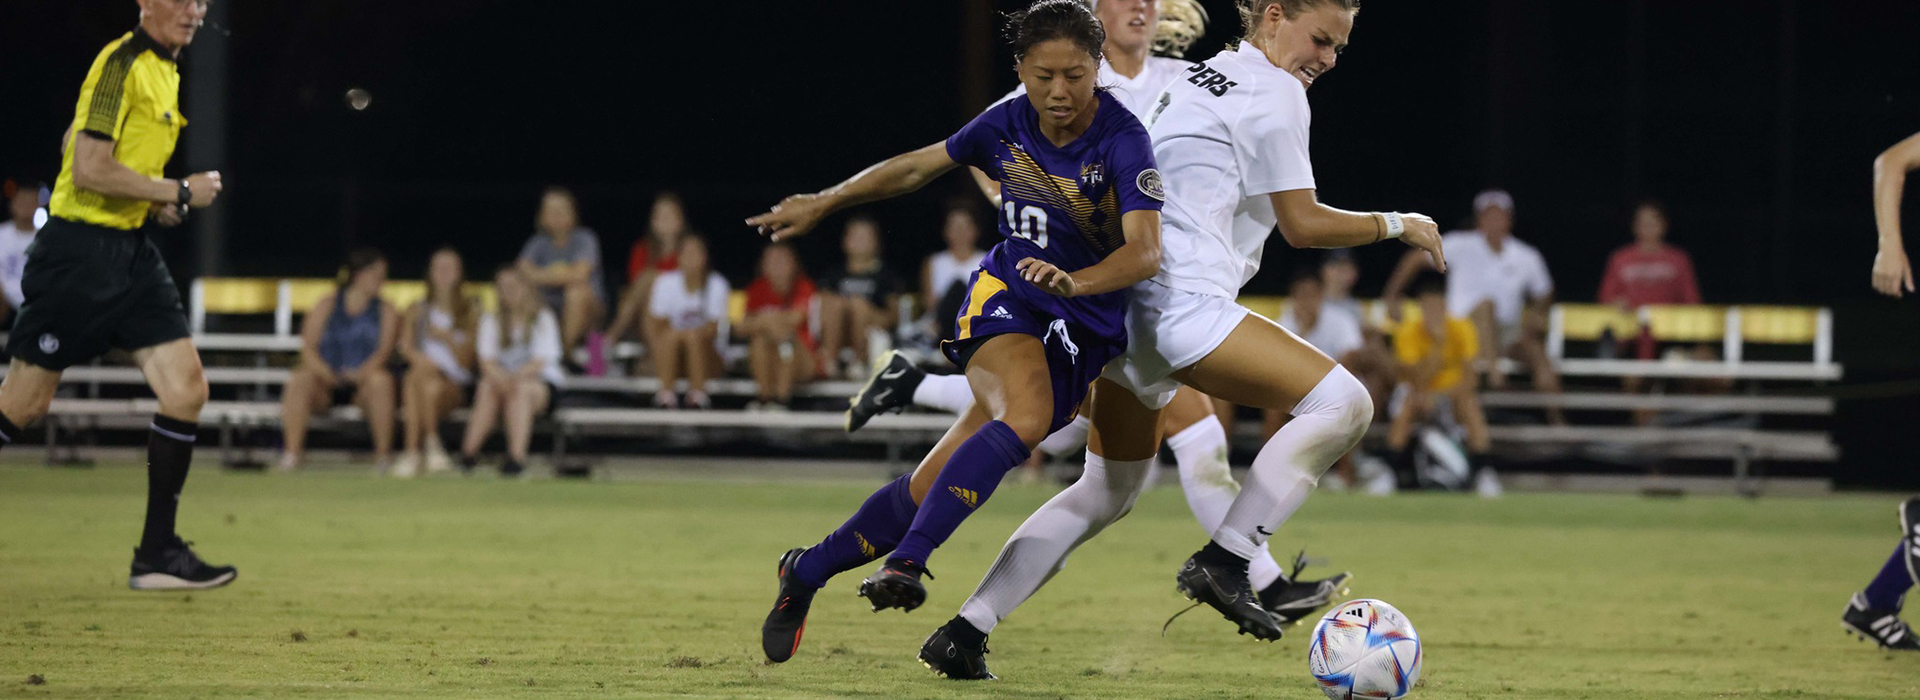 Golden Eagles score late to force dramatic draw at WKU in season opener